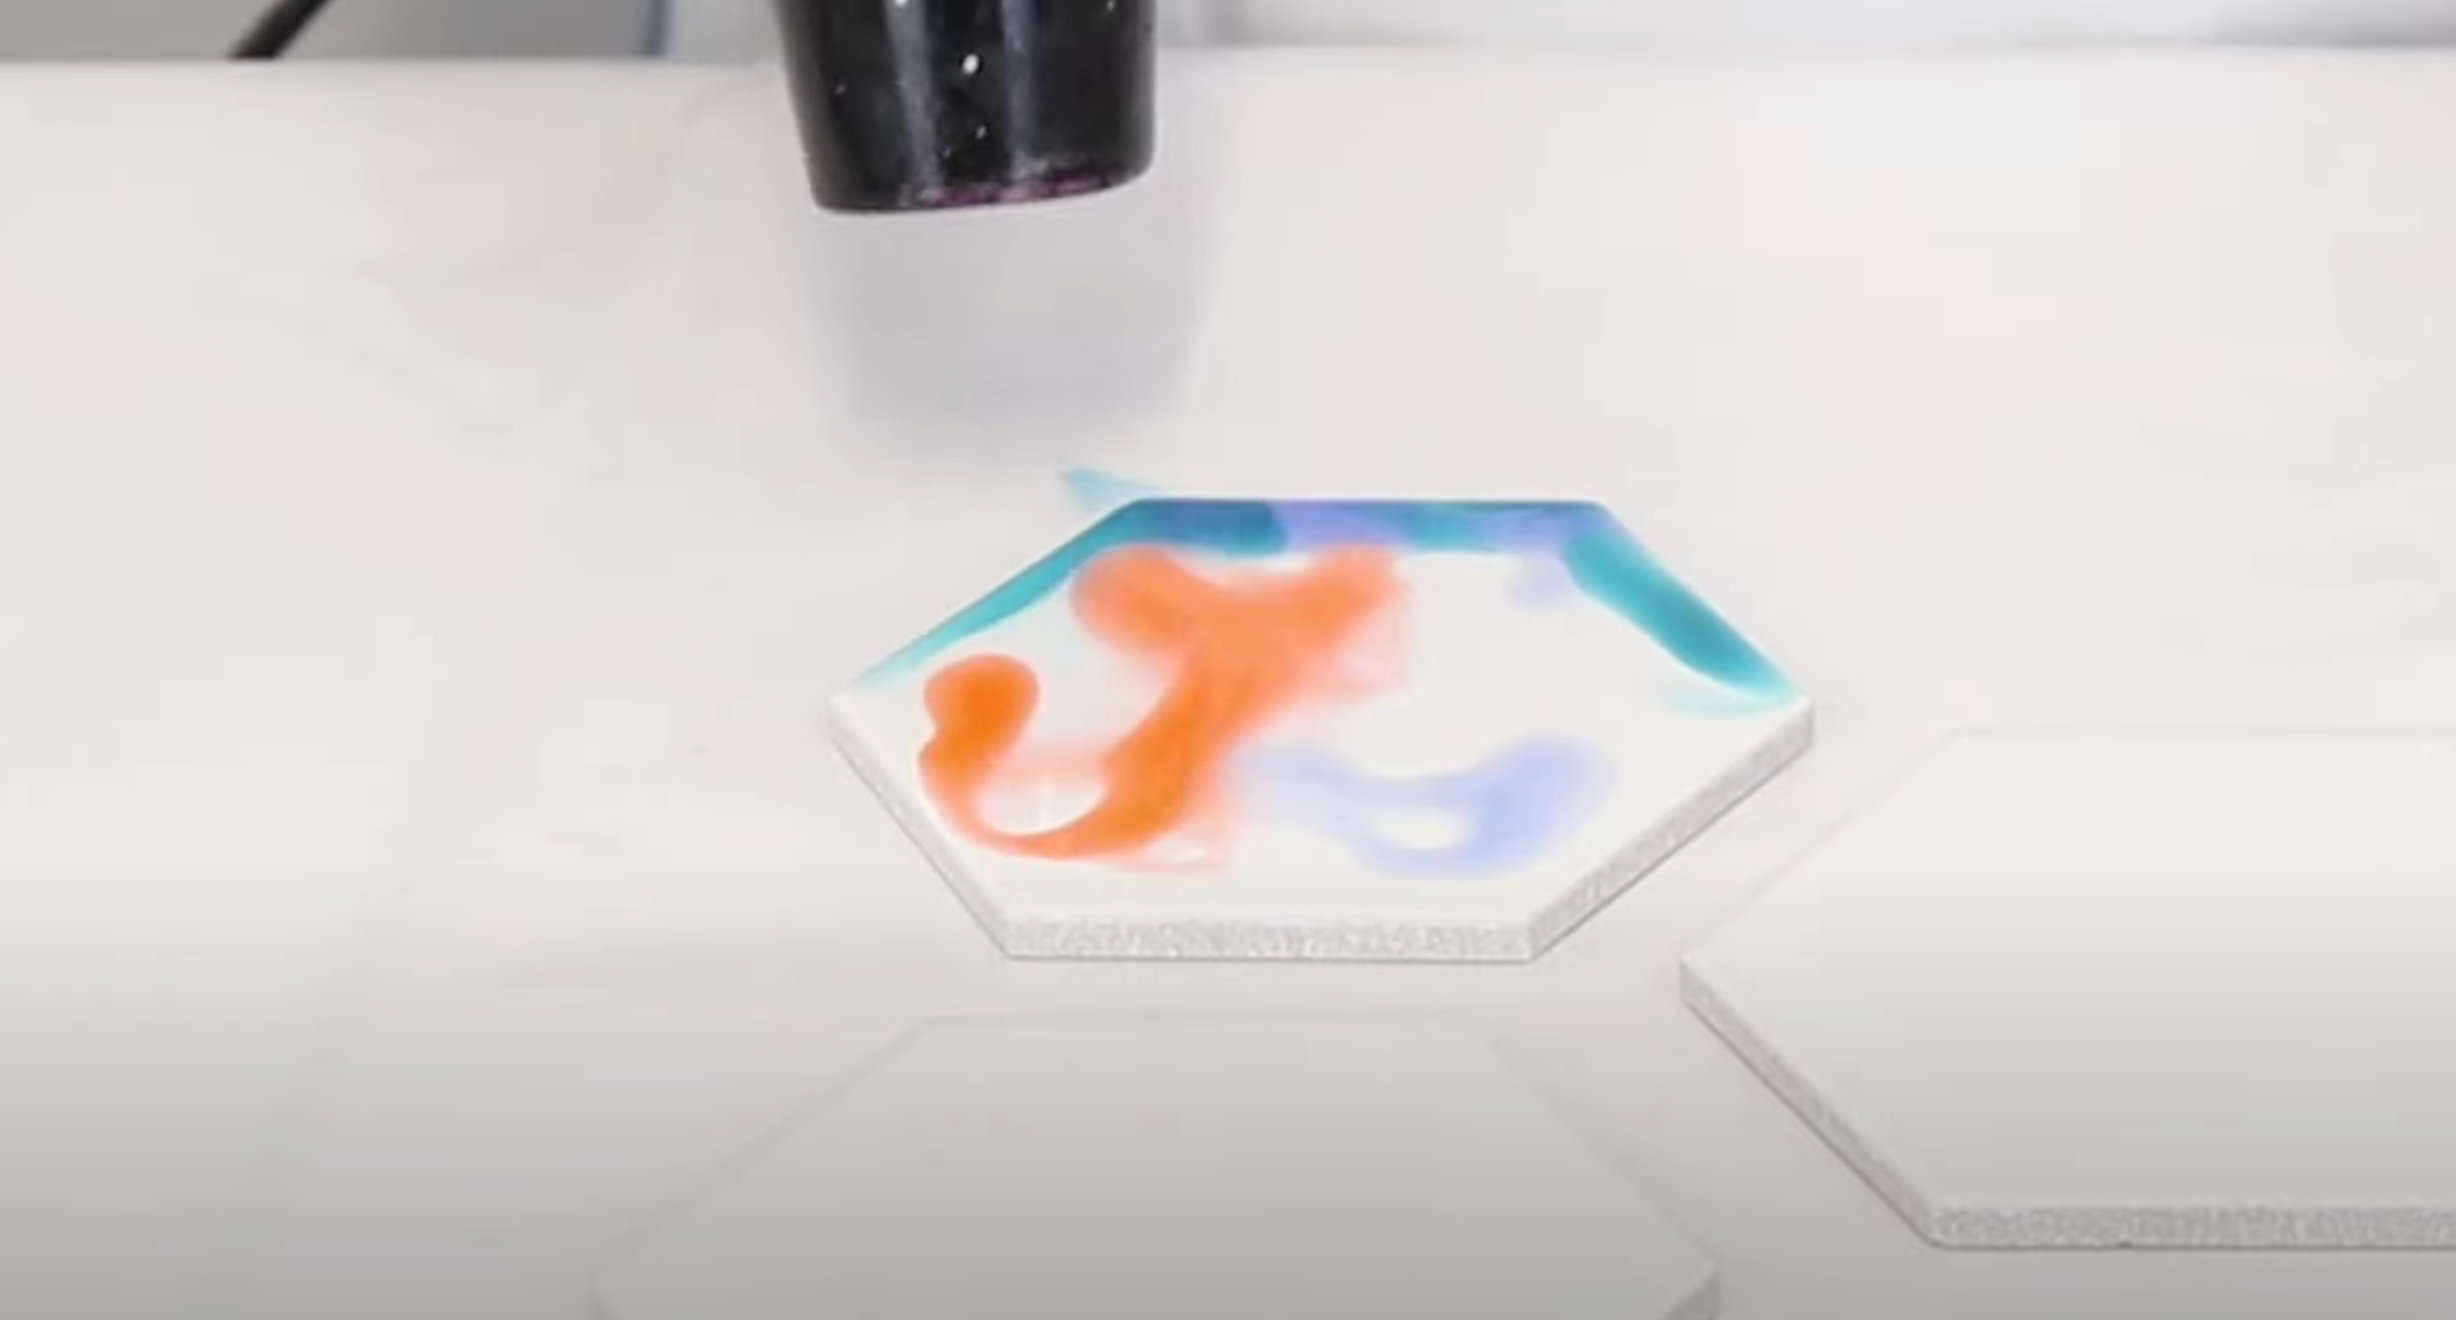 blow alcohol ink with hair dryer